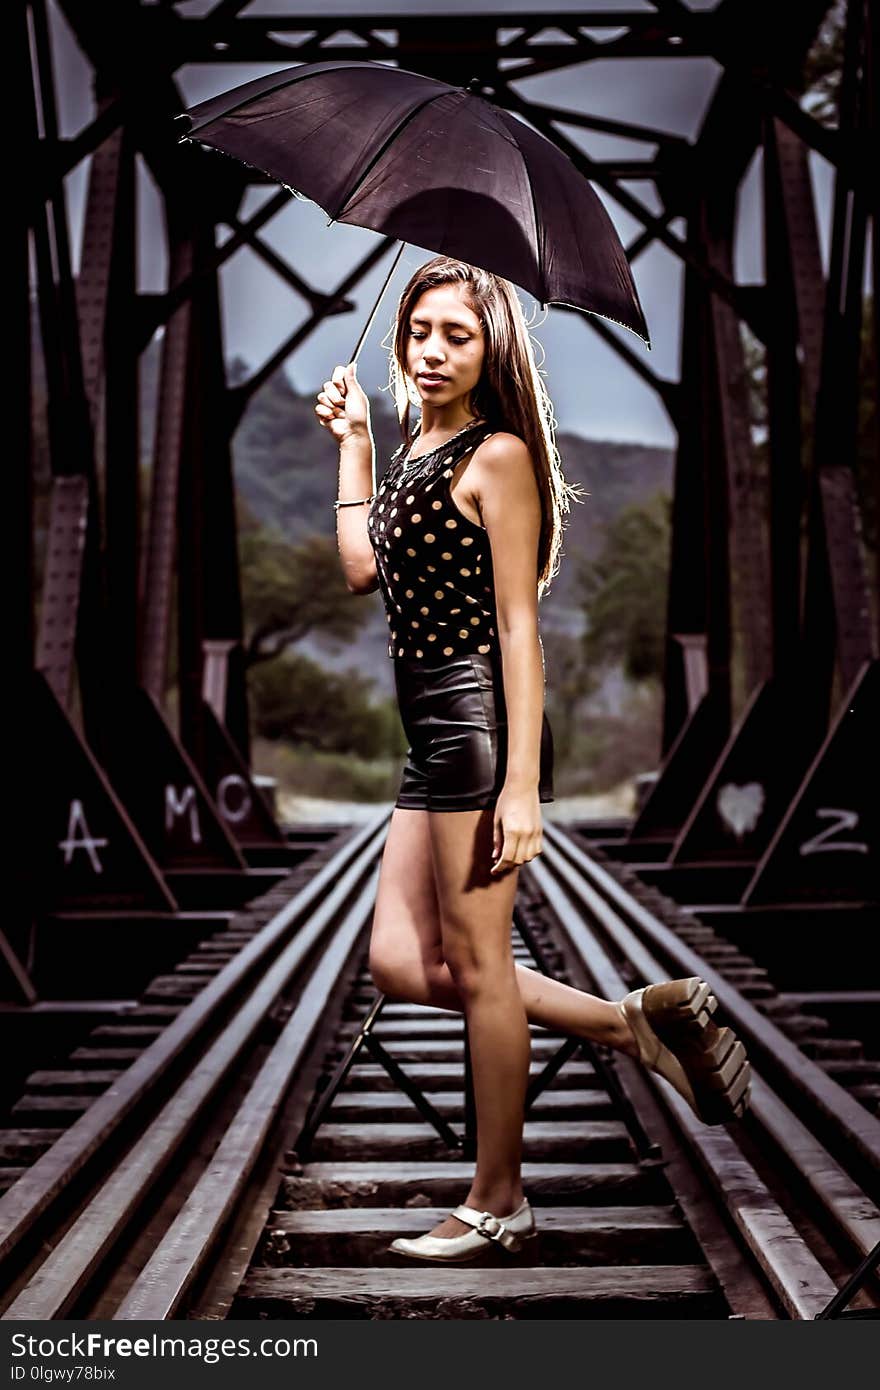 Woman posing in railroad tracks, with some women`s shoes in front focused. Woman posing in railroad tracks, with some women`s shoes in front focused